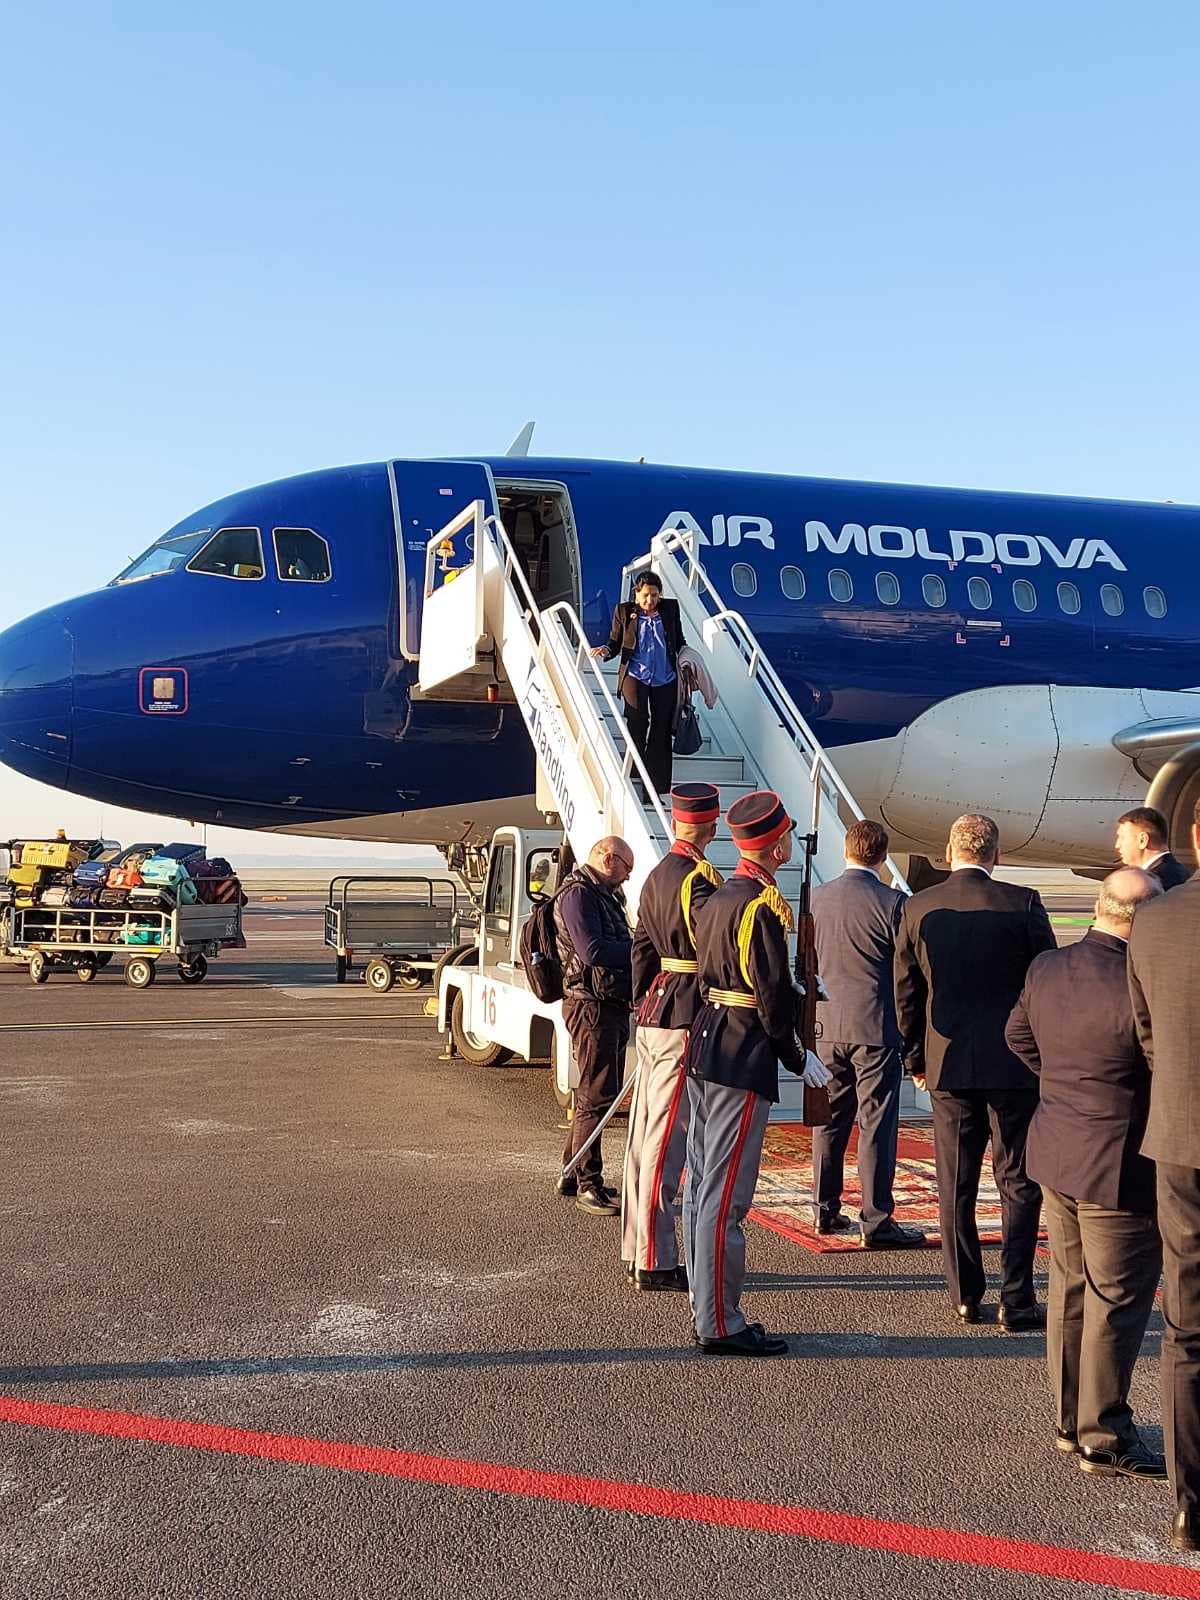 On october 16 Air Moldova airline successfully operated the first flight